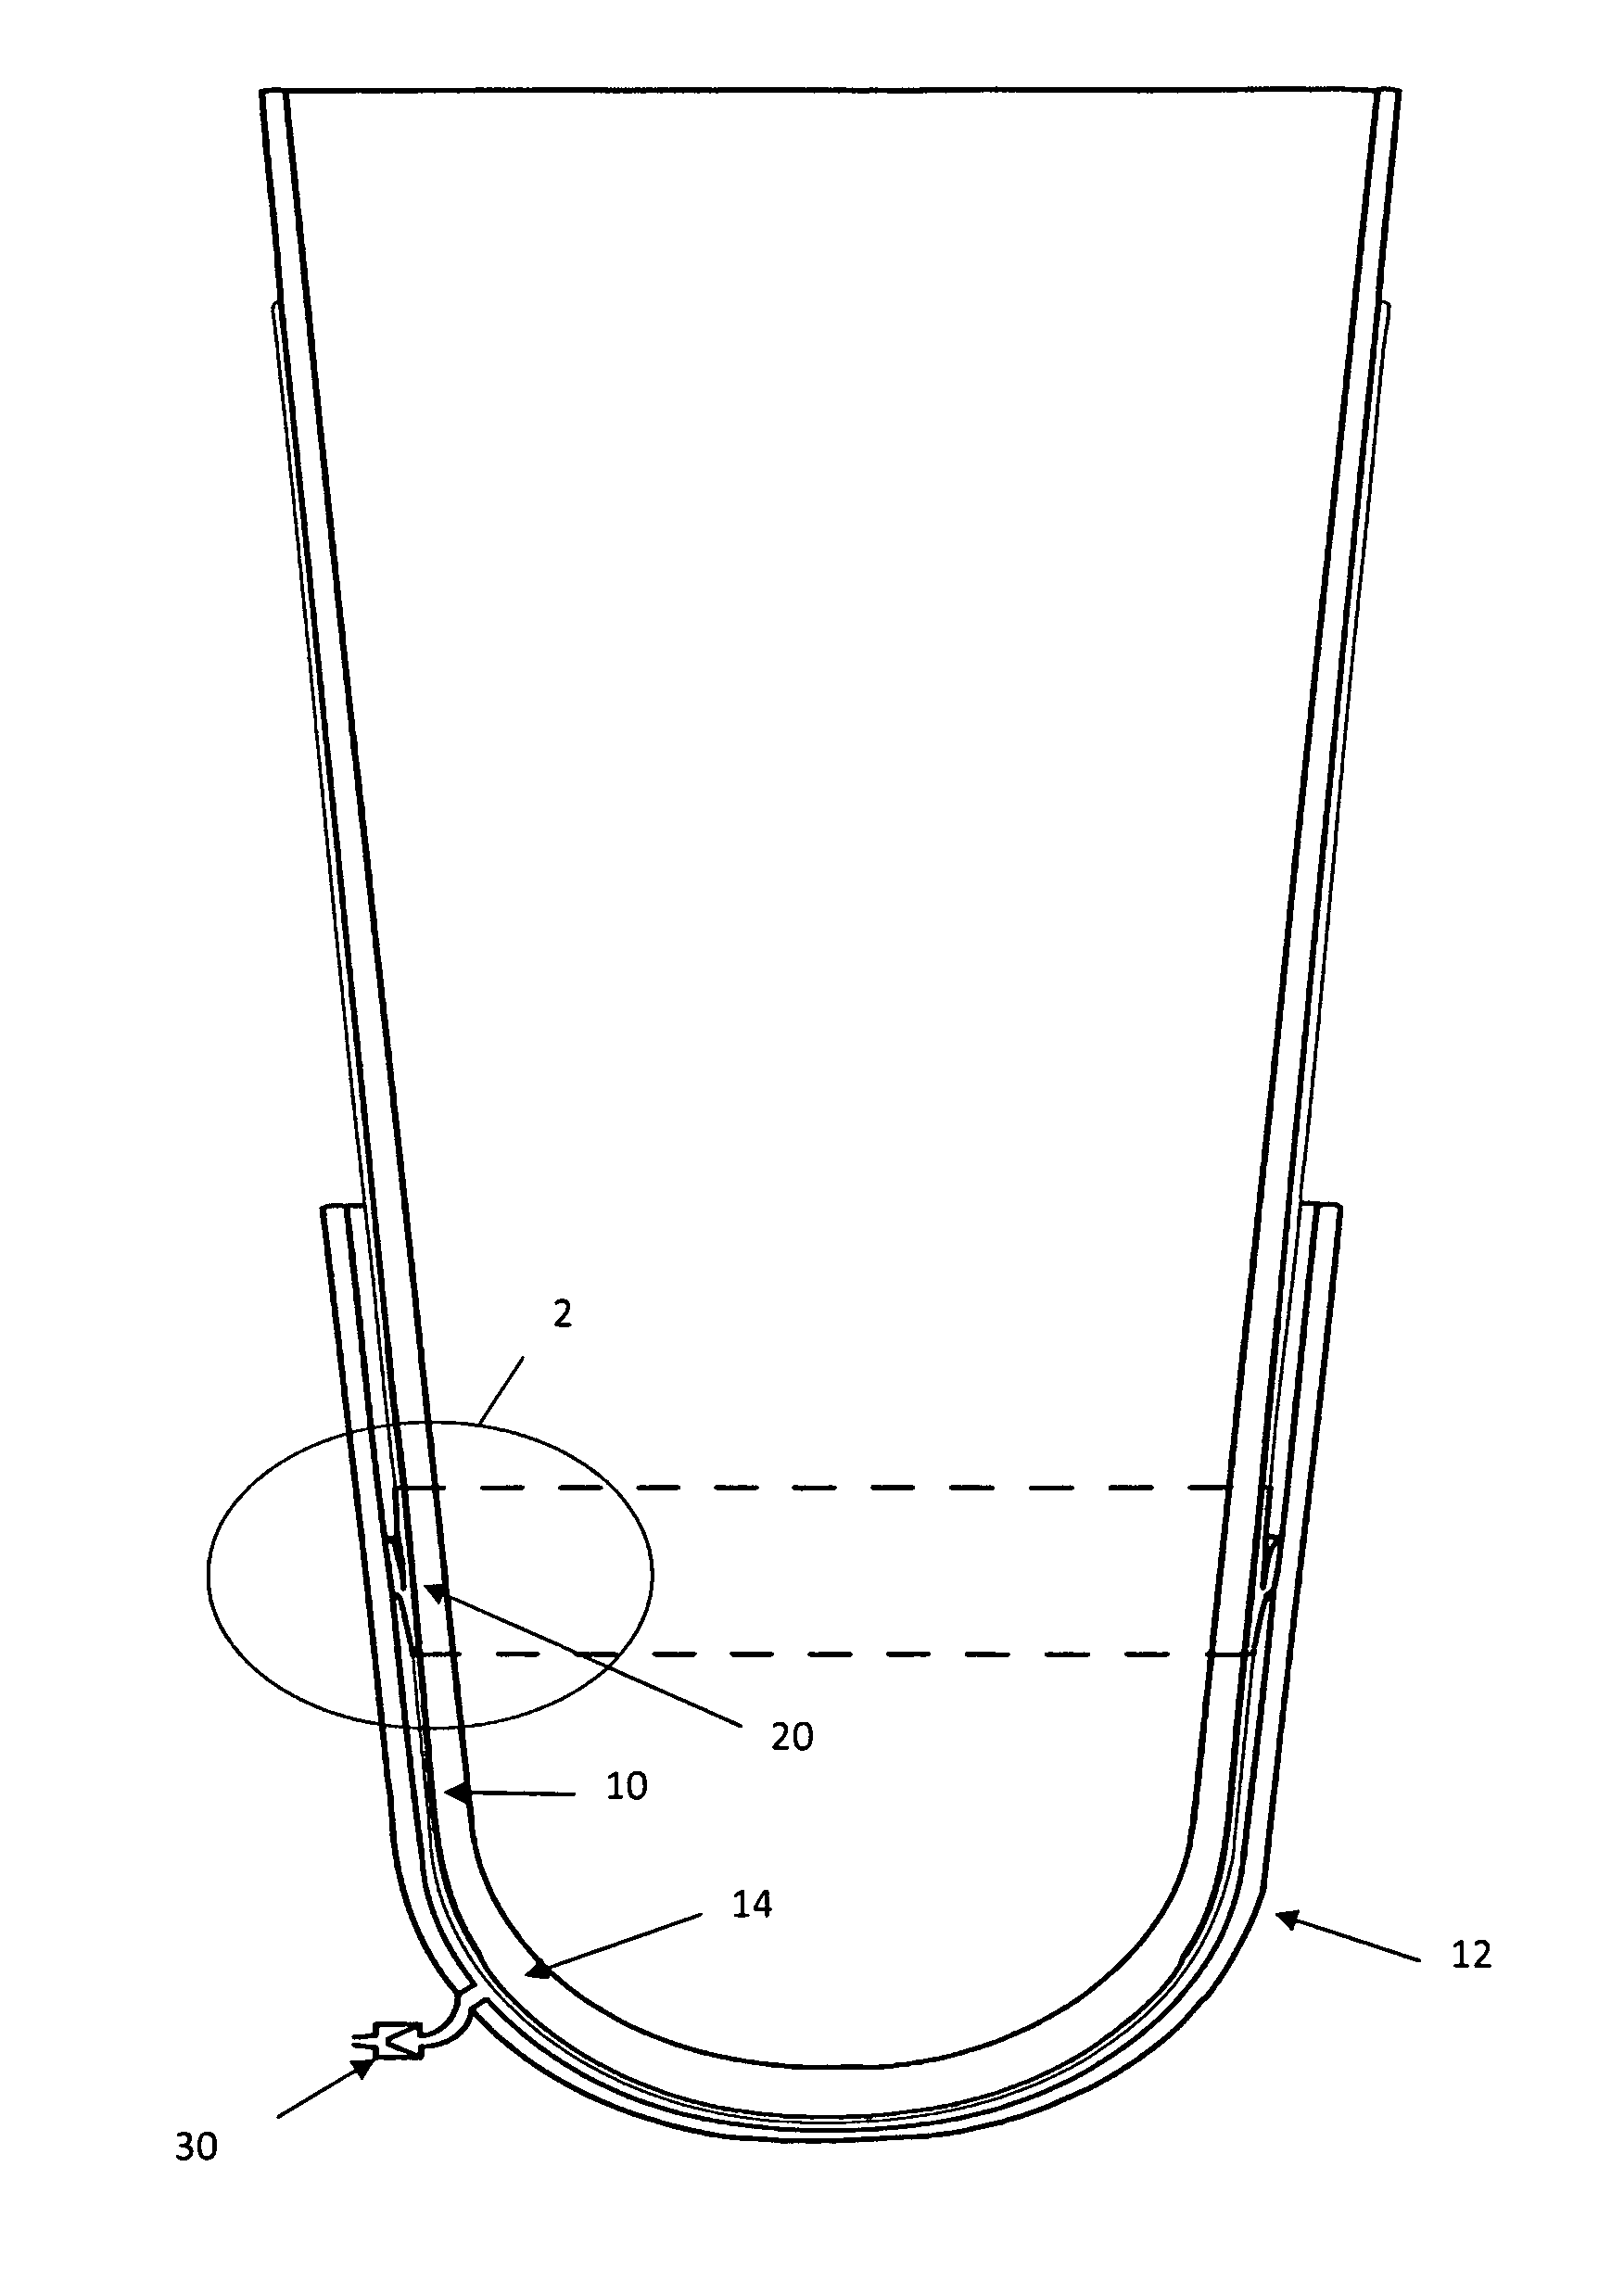 Sealing sheath for prosthetic liner and related methods